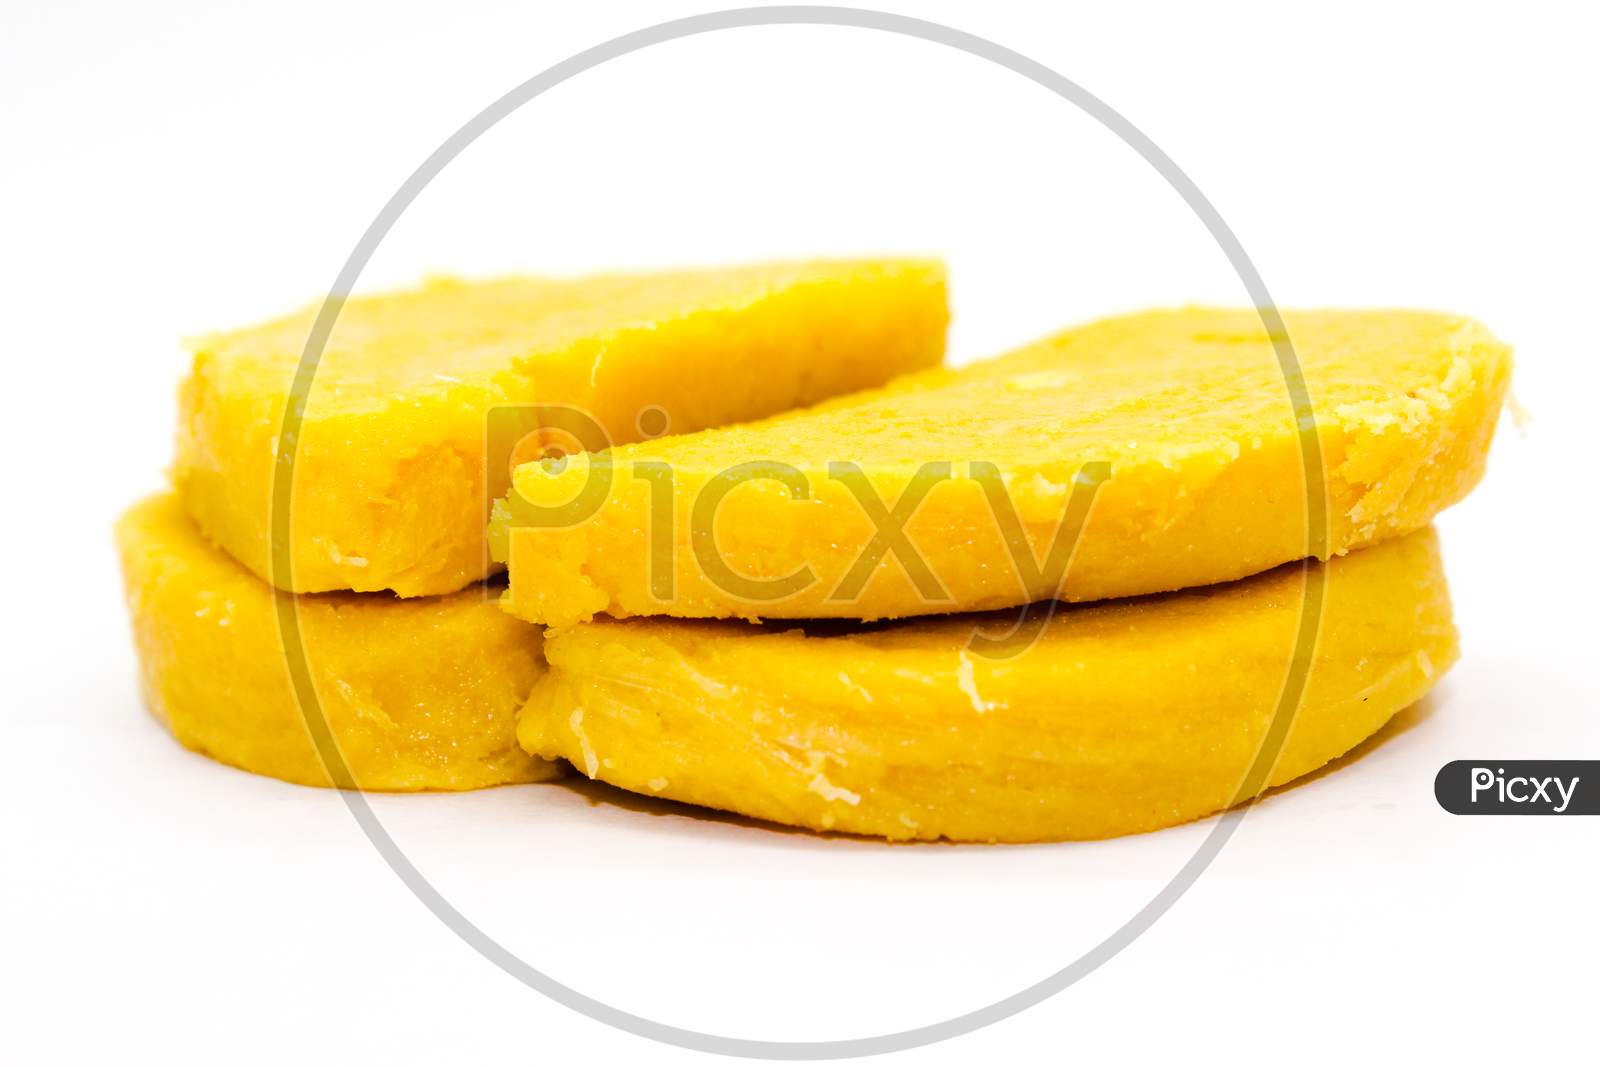 Gram Flour Sweets On White Background With Selective Focus